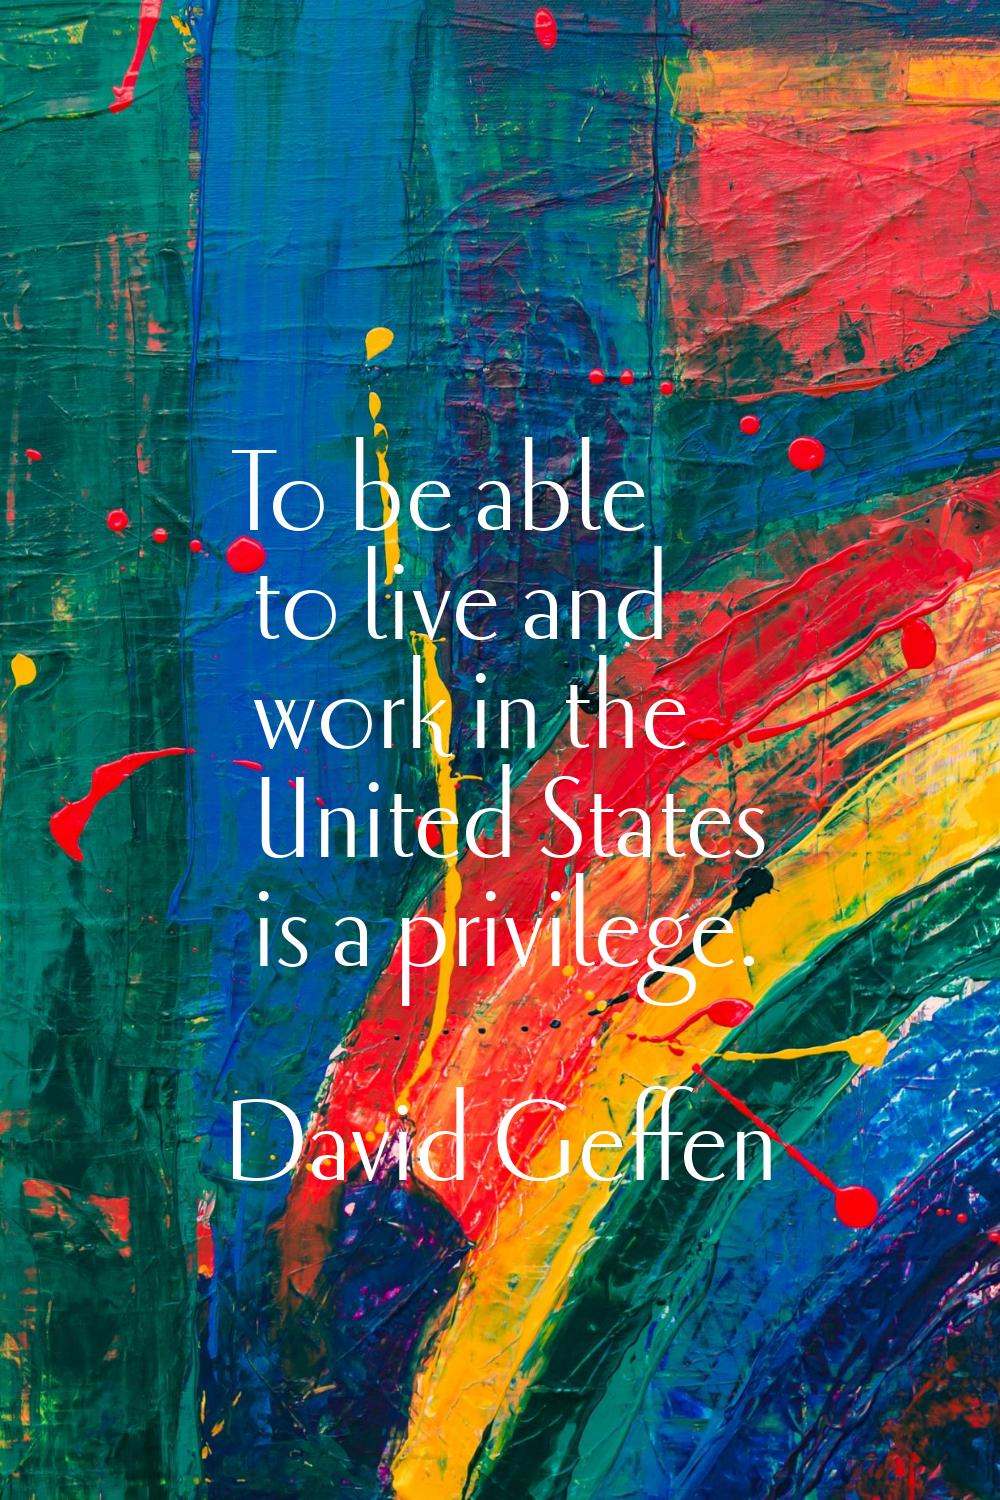 To be able to live and work in the United States is a privilege.